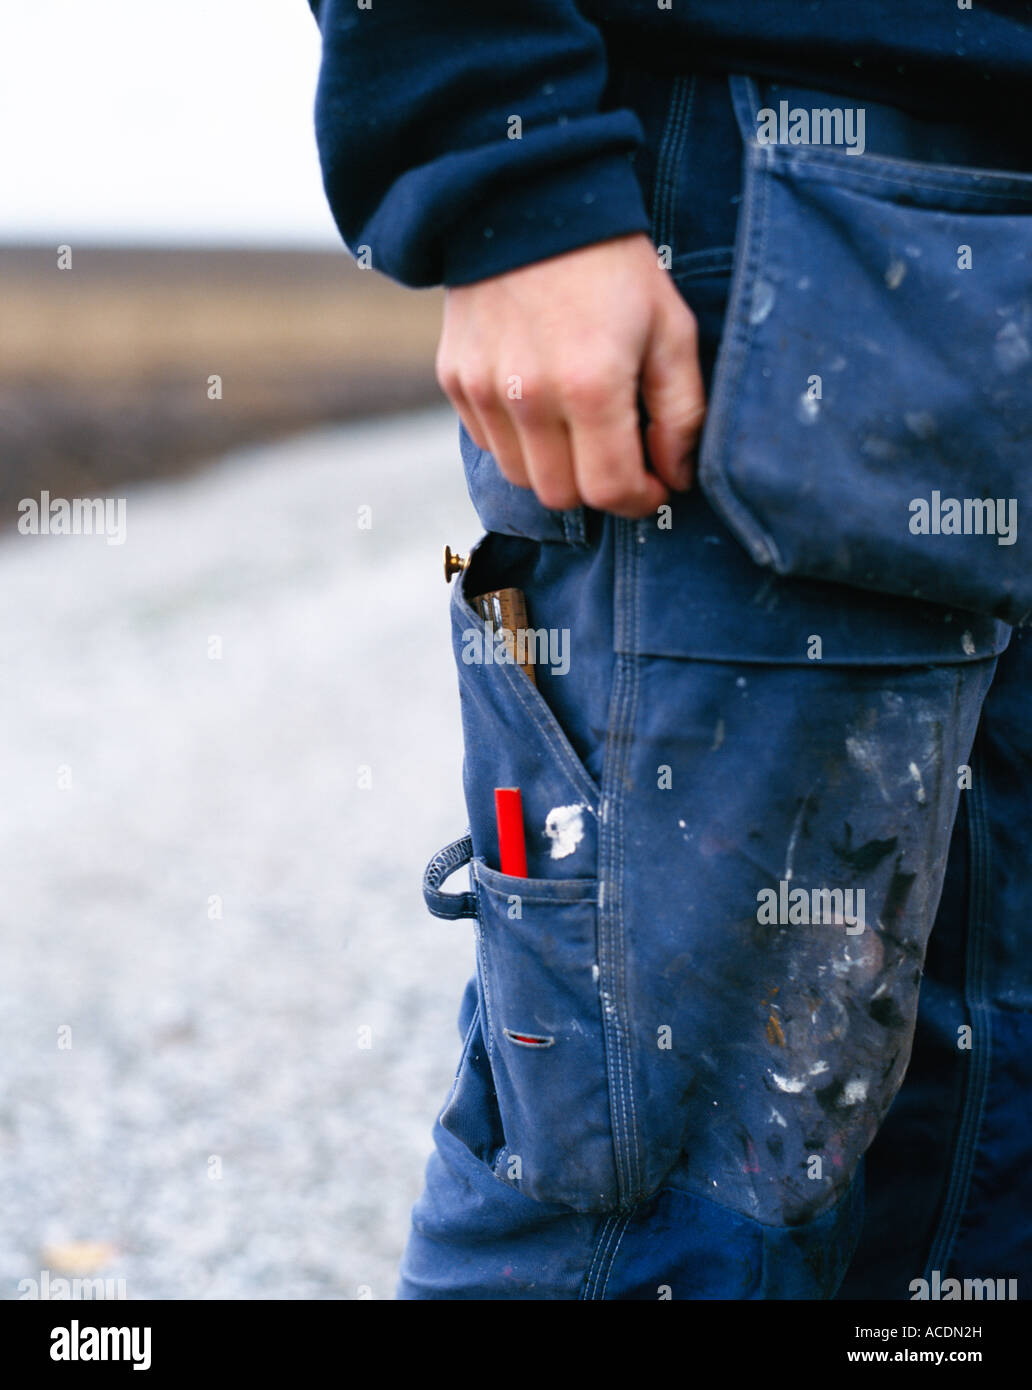 Work-clothes on a carpenter. Stock Photo